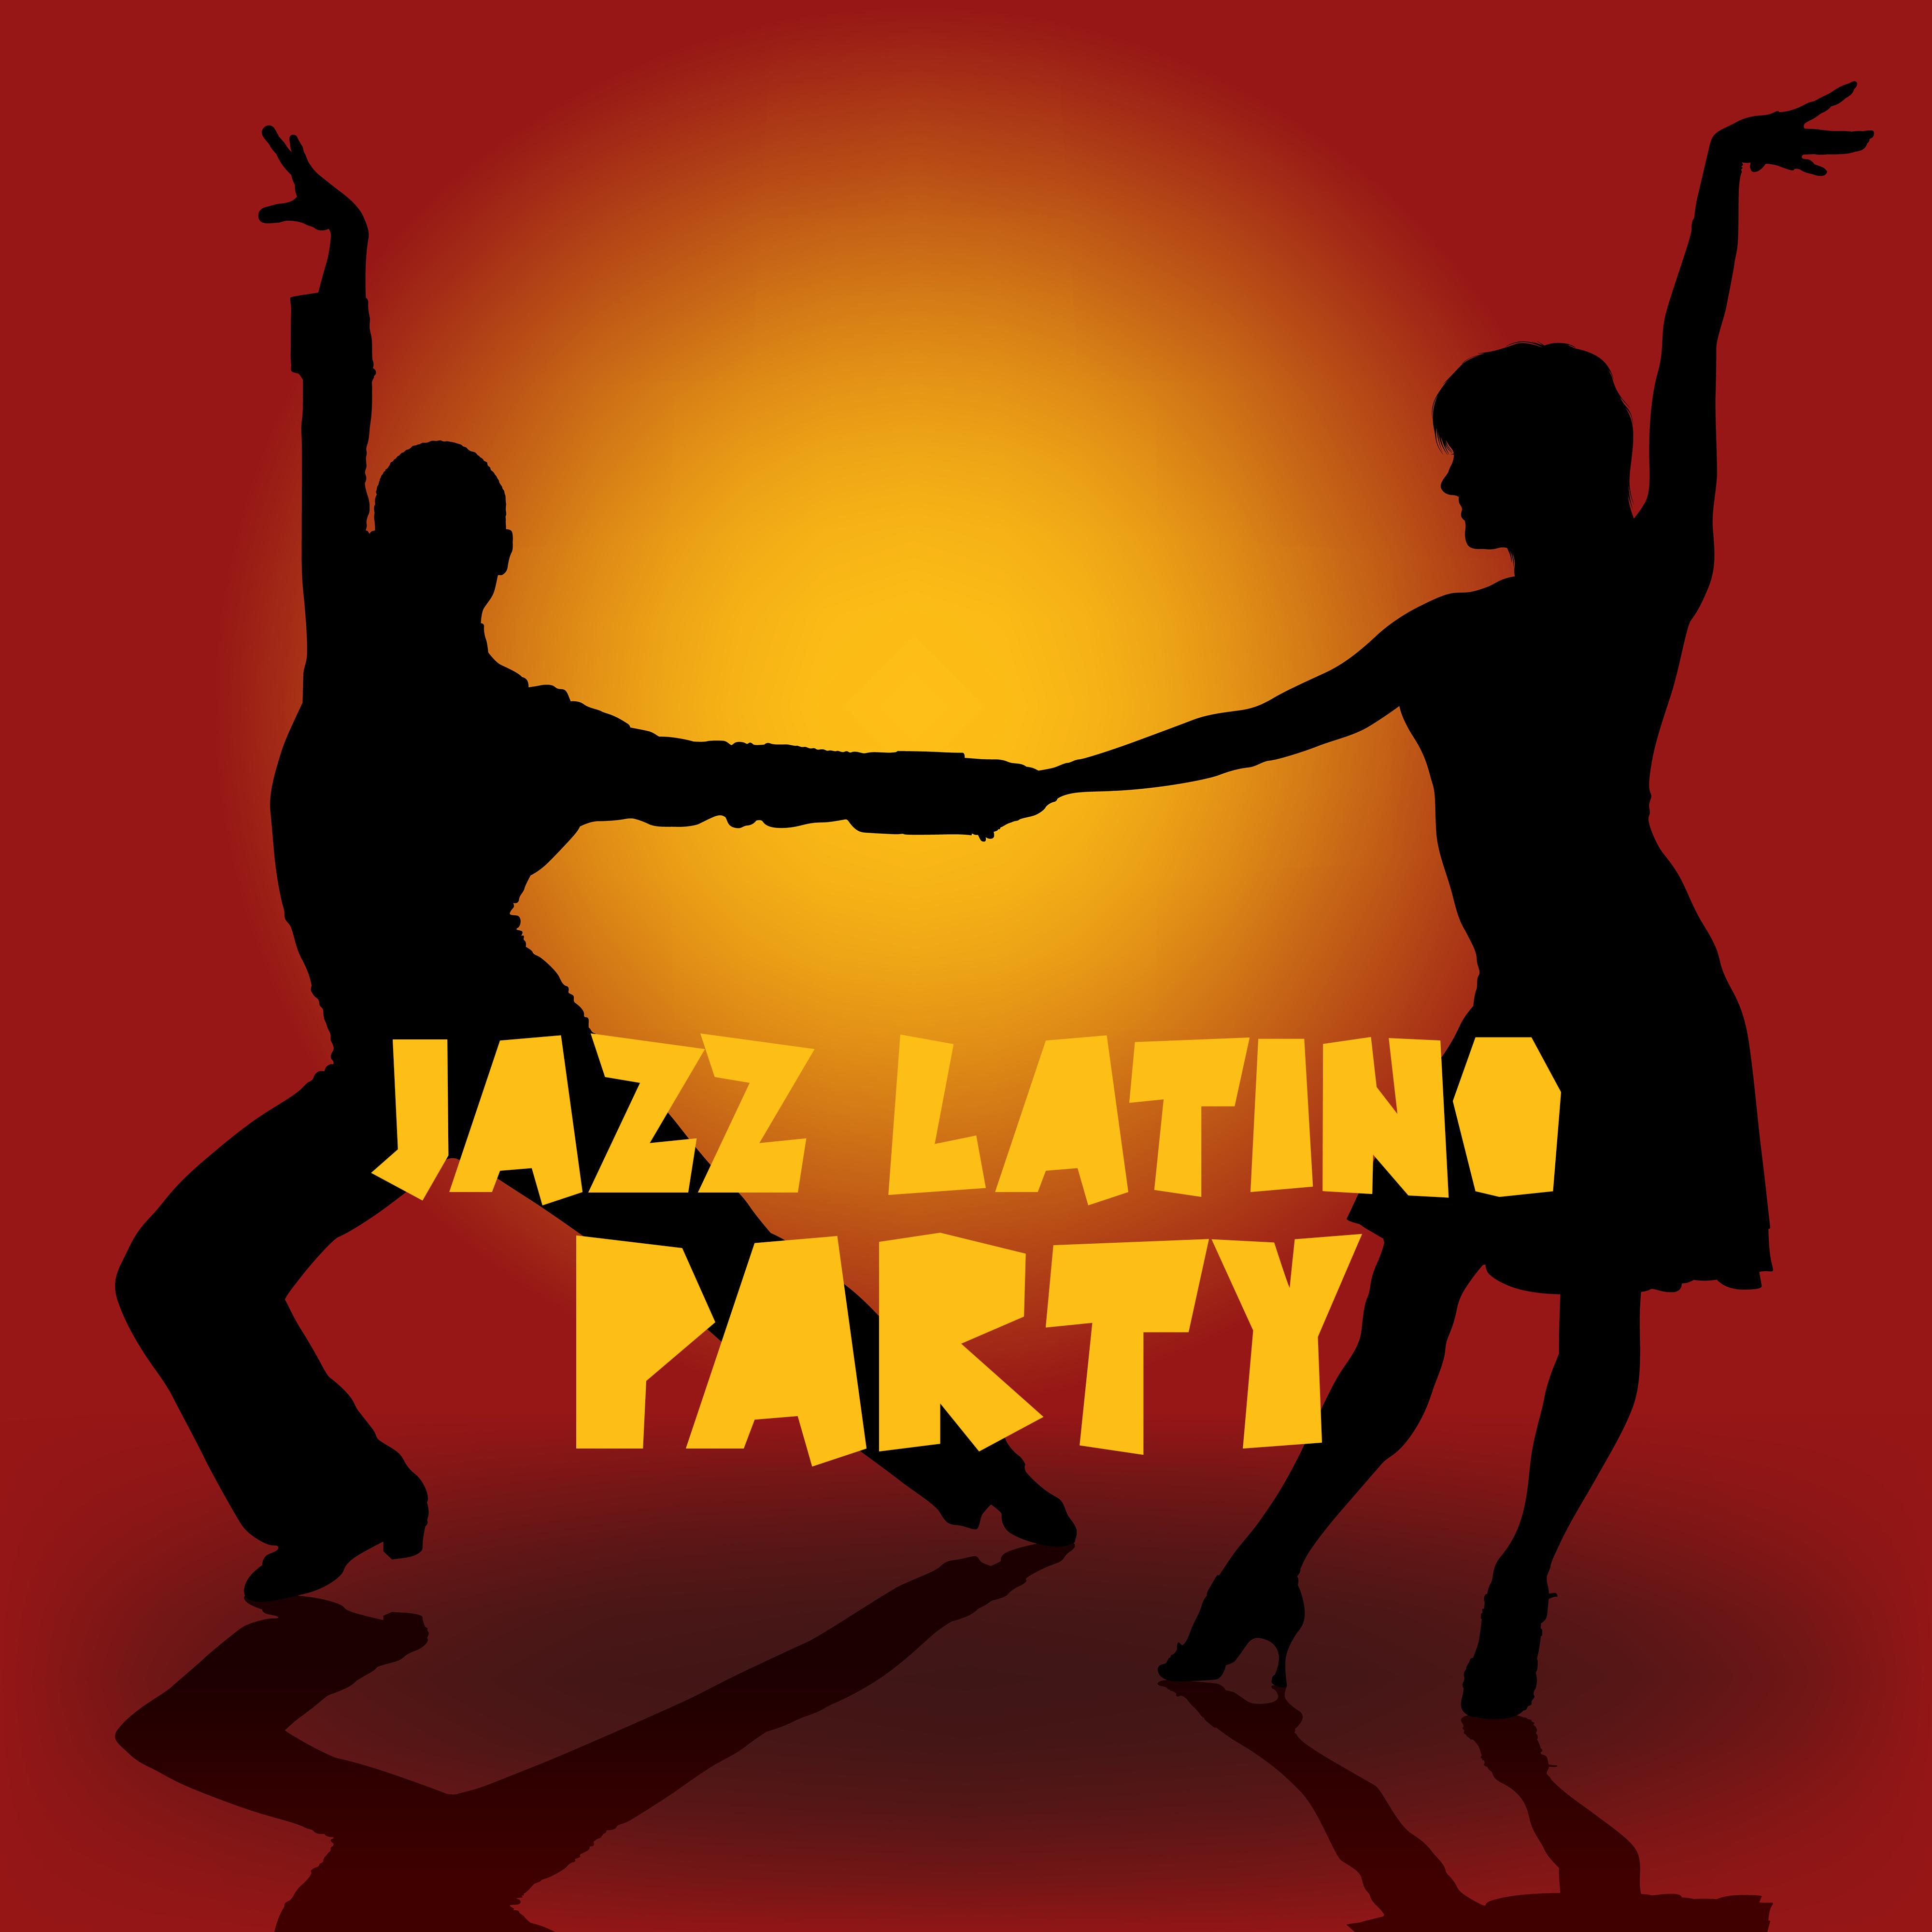 Jazz Latino Party: 2019 Smooth Jazz **** Music, Evening Dance Party Songs, Sensual Salsa Melodies, Piano, Guitar & Sax Good Vibrations